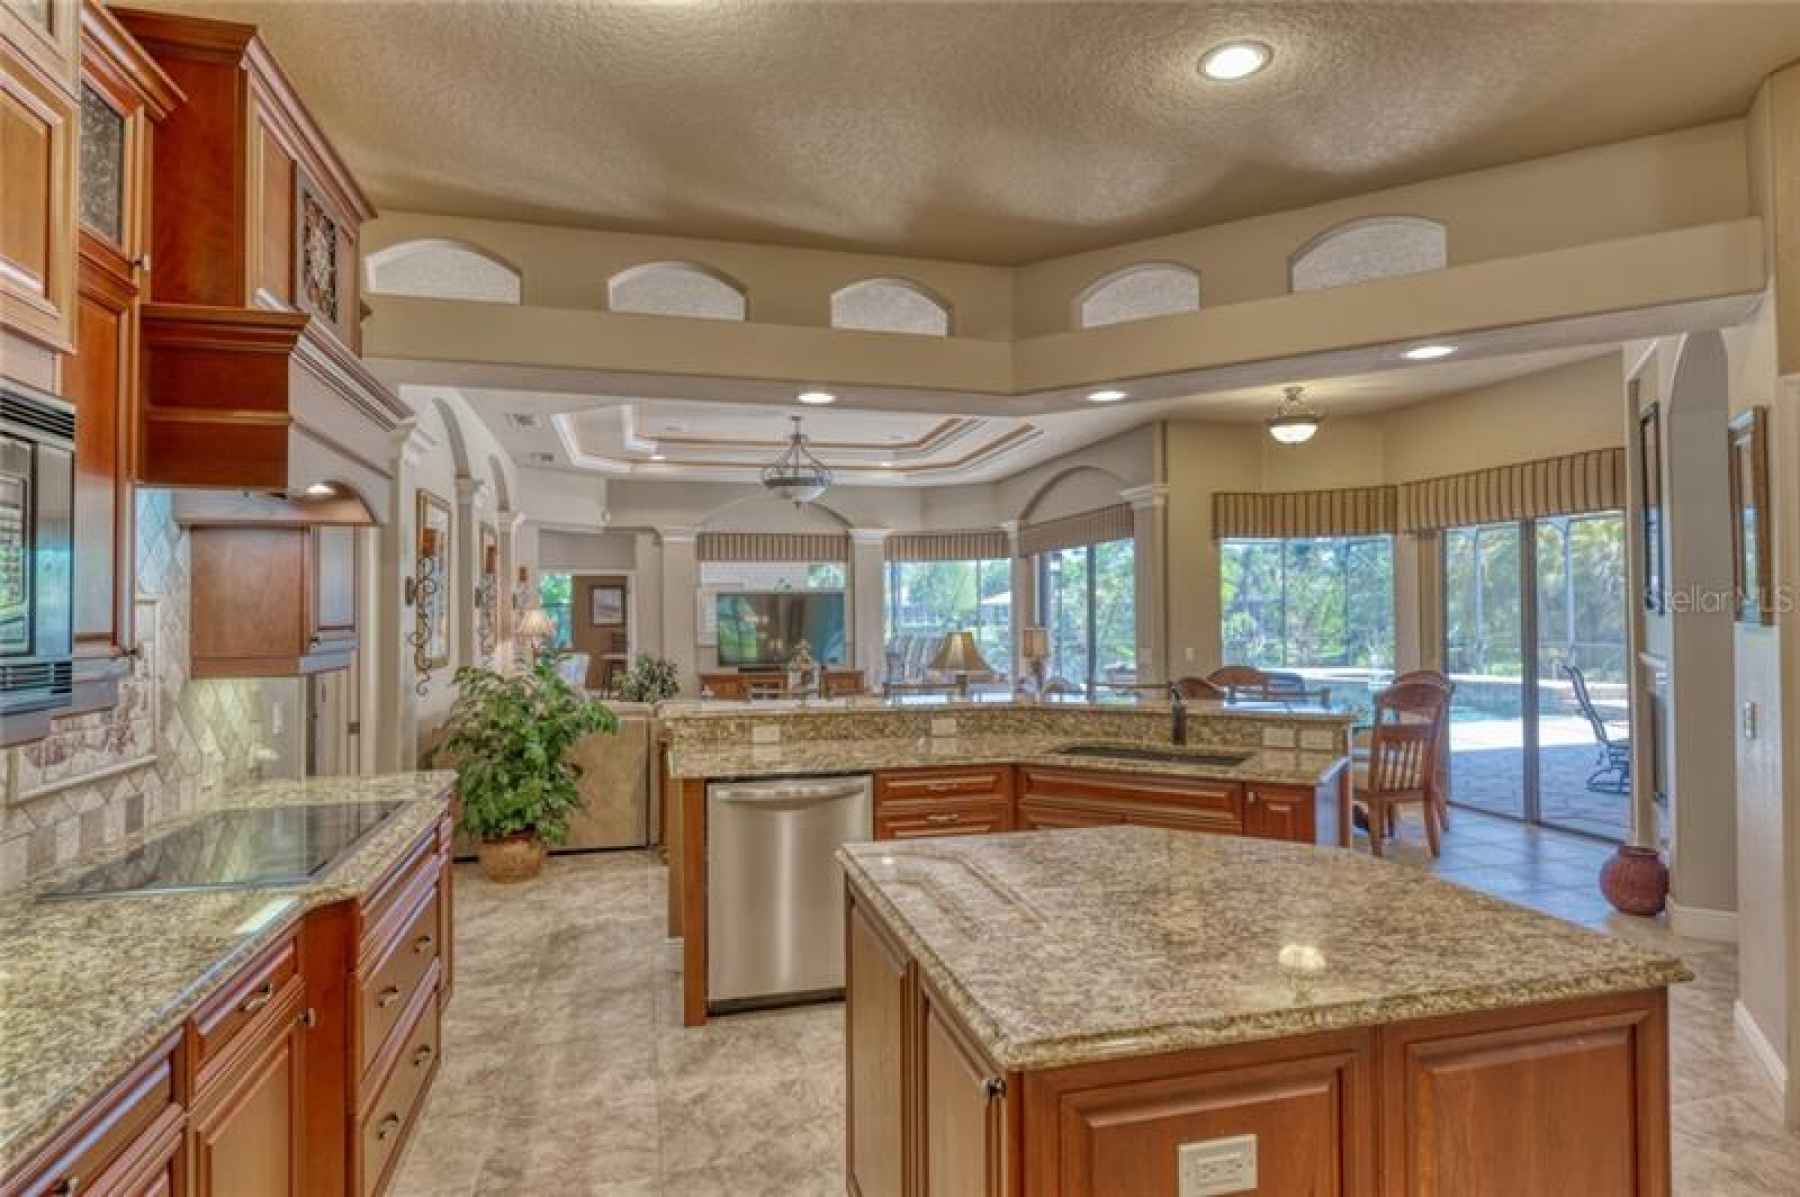 Take another look at what you get to look at when you are in the kitchen!  WOW!!!